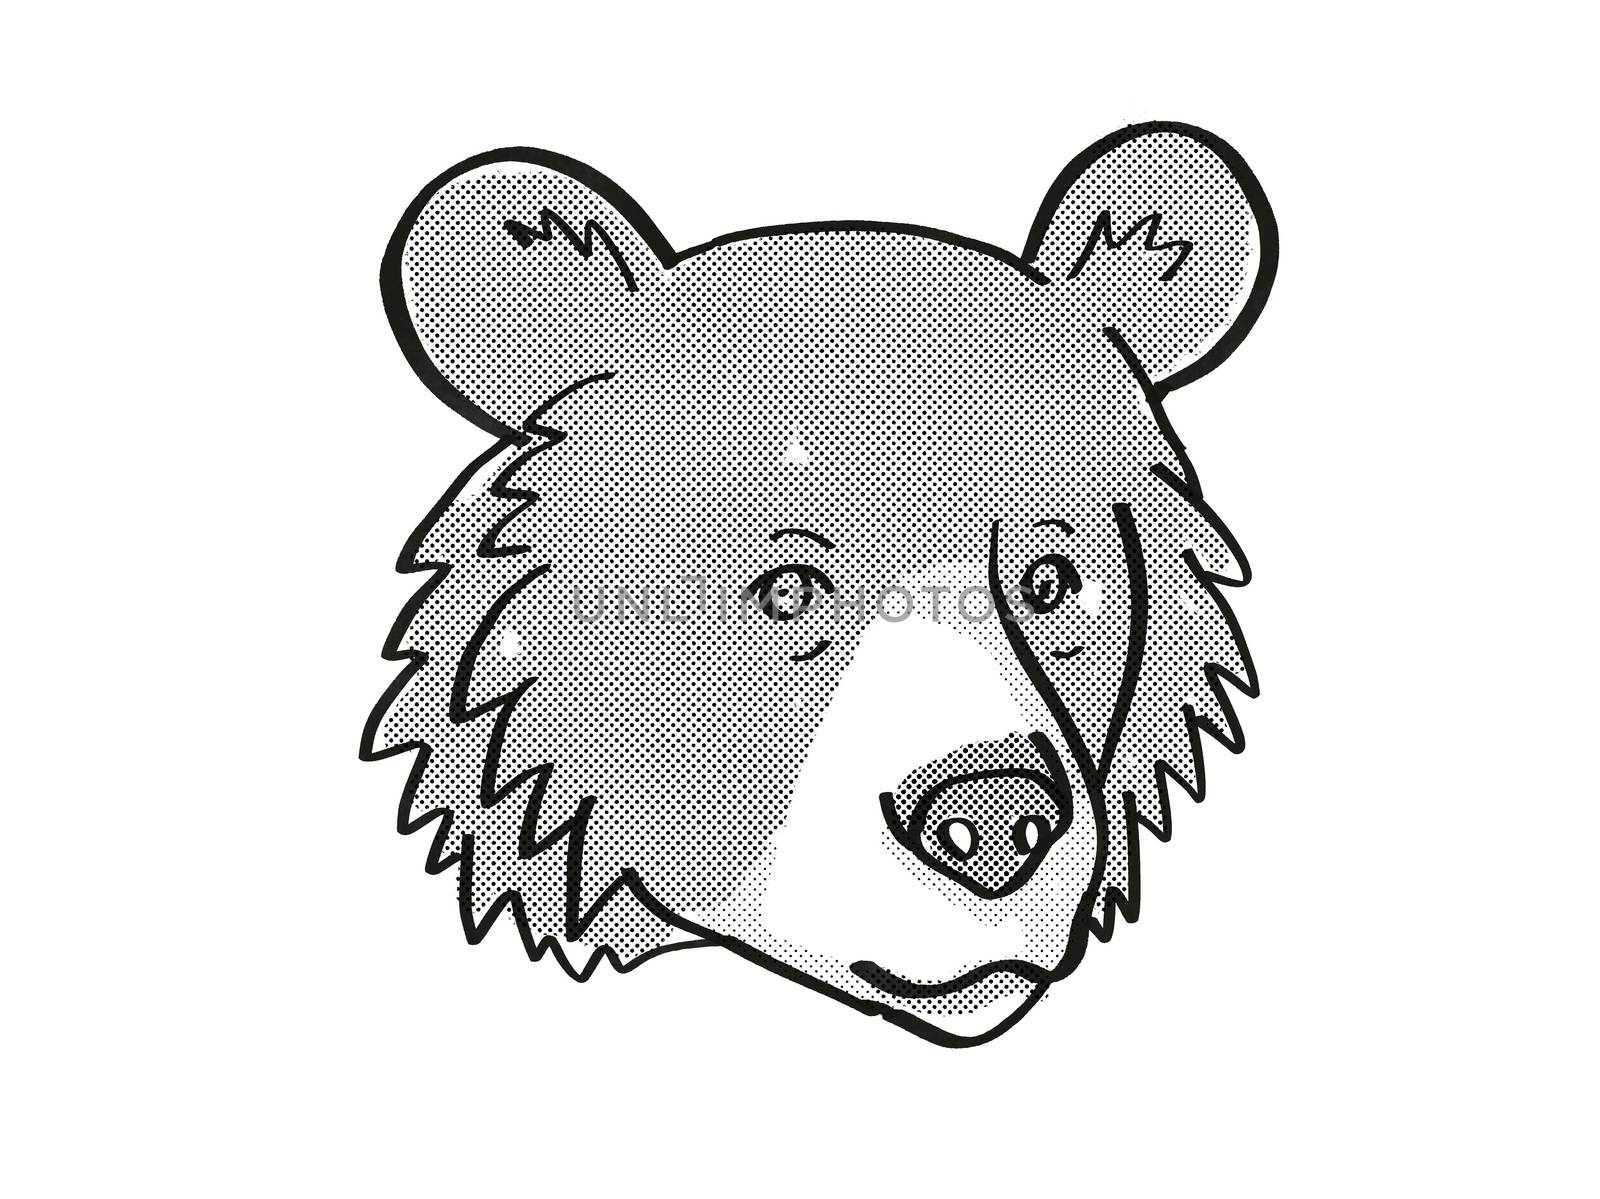 Retro cartoon mono line style drawing of head of an Asiatic Black Bear or Ursus tibetanus, an endangered wildlife species on isolated white background done in black and white.